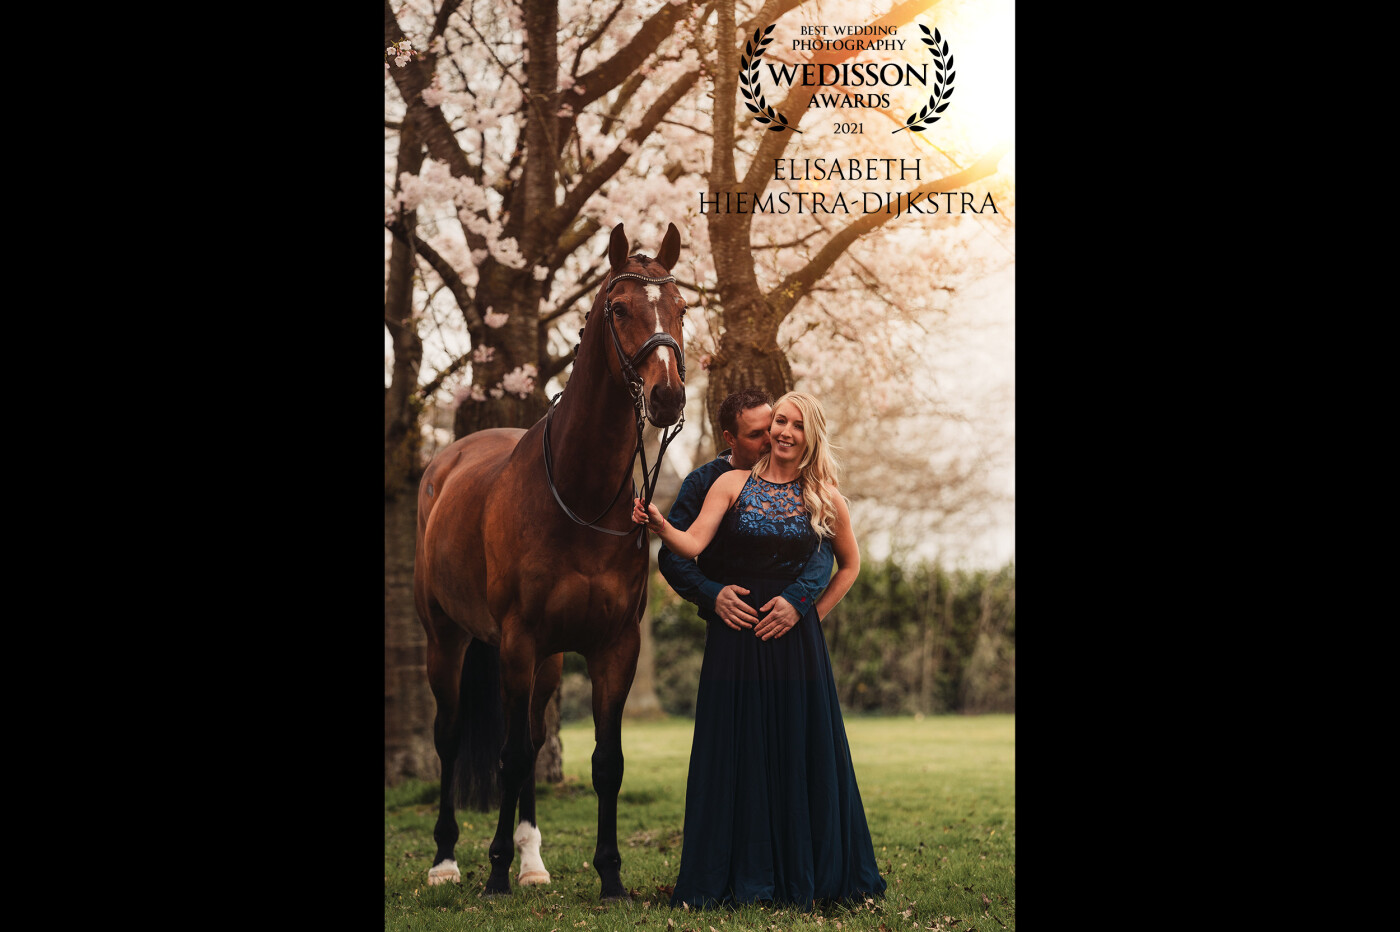 Unfortunately, this bridal couple had to change their wedding date due to covid. We made this love shoot in blossom time. Their own horse was a great model during this photo shoot. On their wedding day in September 2021, I can photograph their day and the horse will certainly love it again.